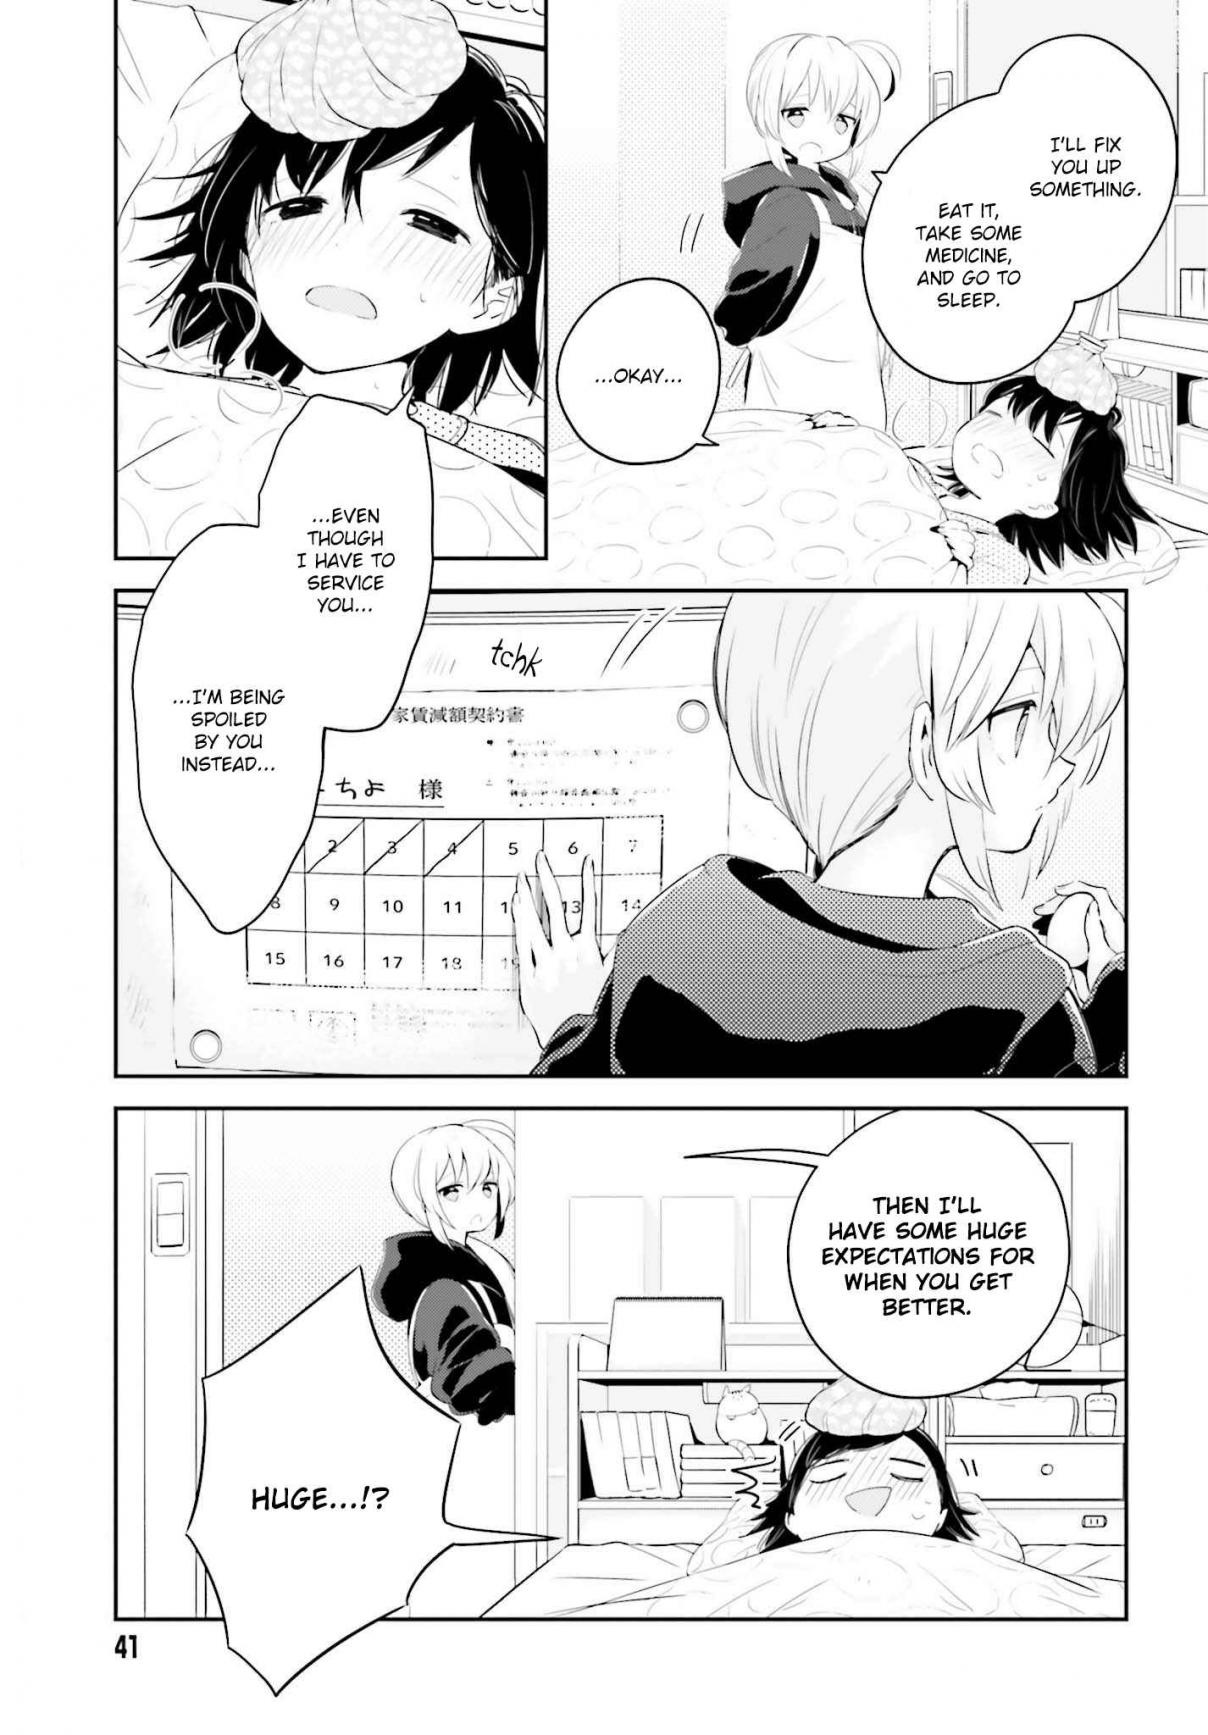 Even If It Was Just Once, I Regret It Ch. 4.1 You Don't Know About People's Feelings Part 1